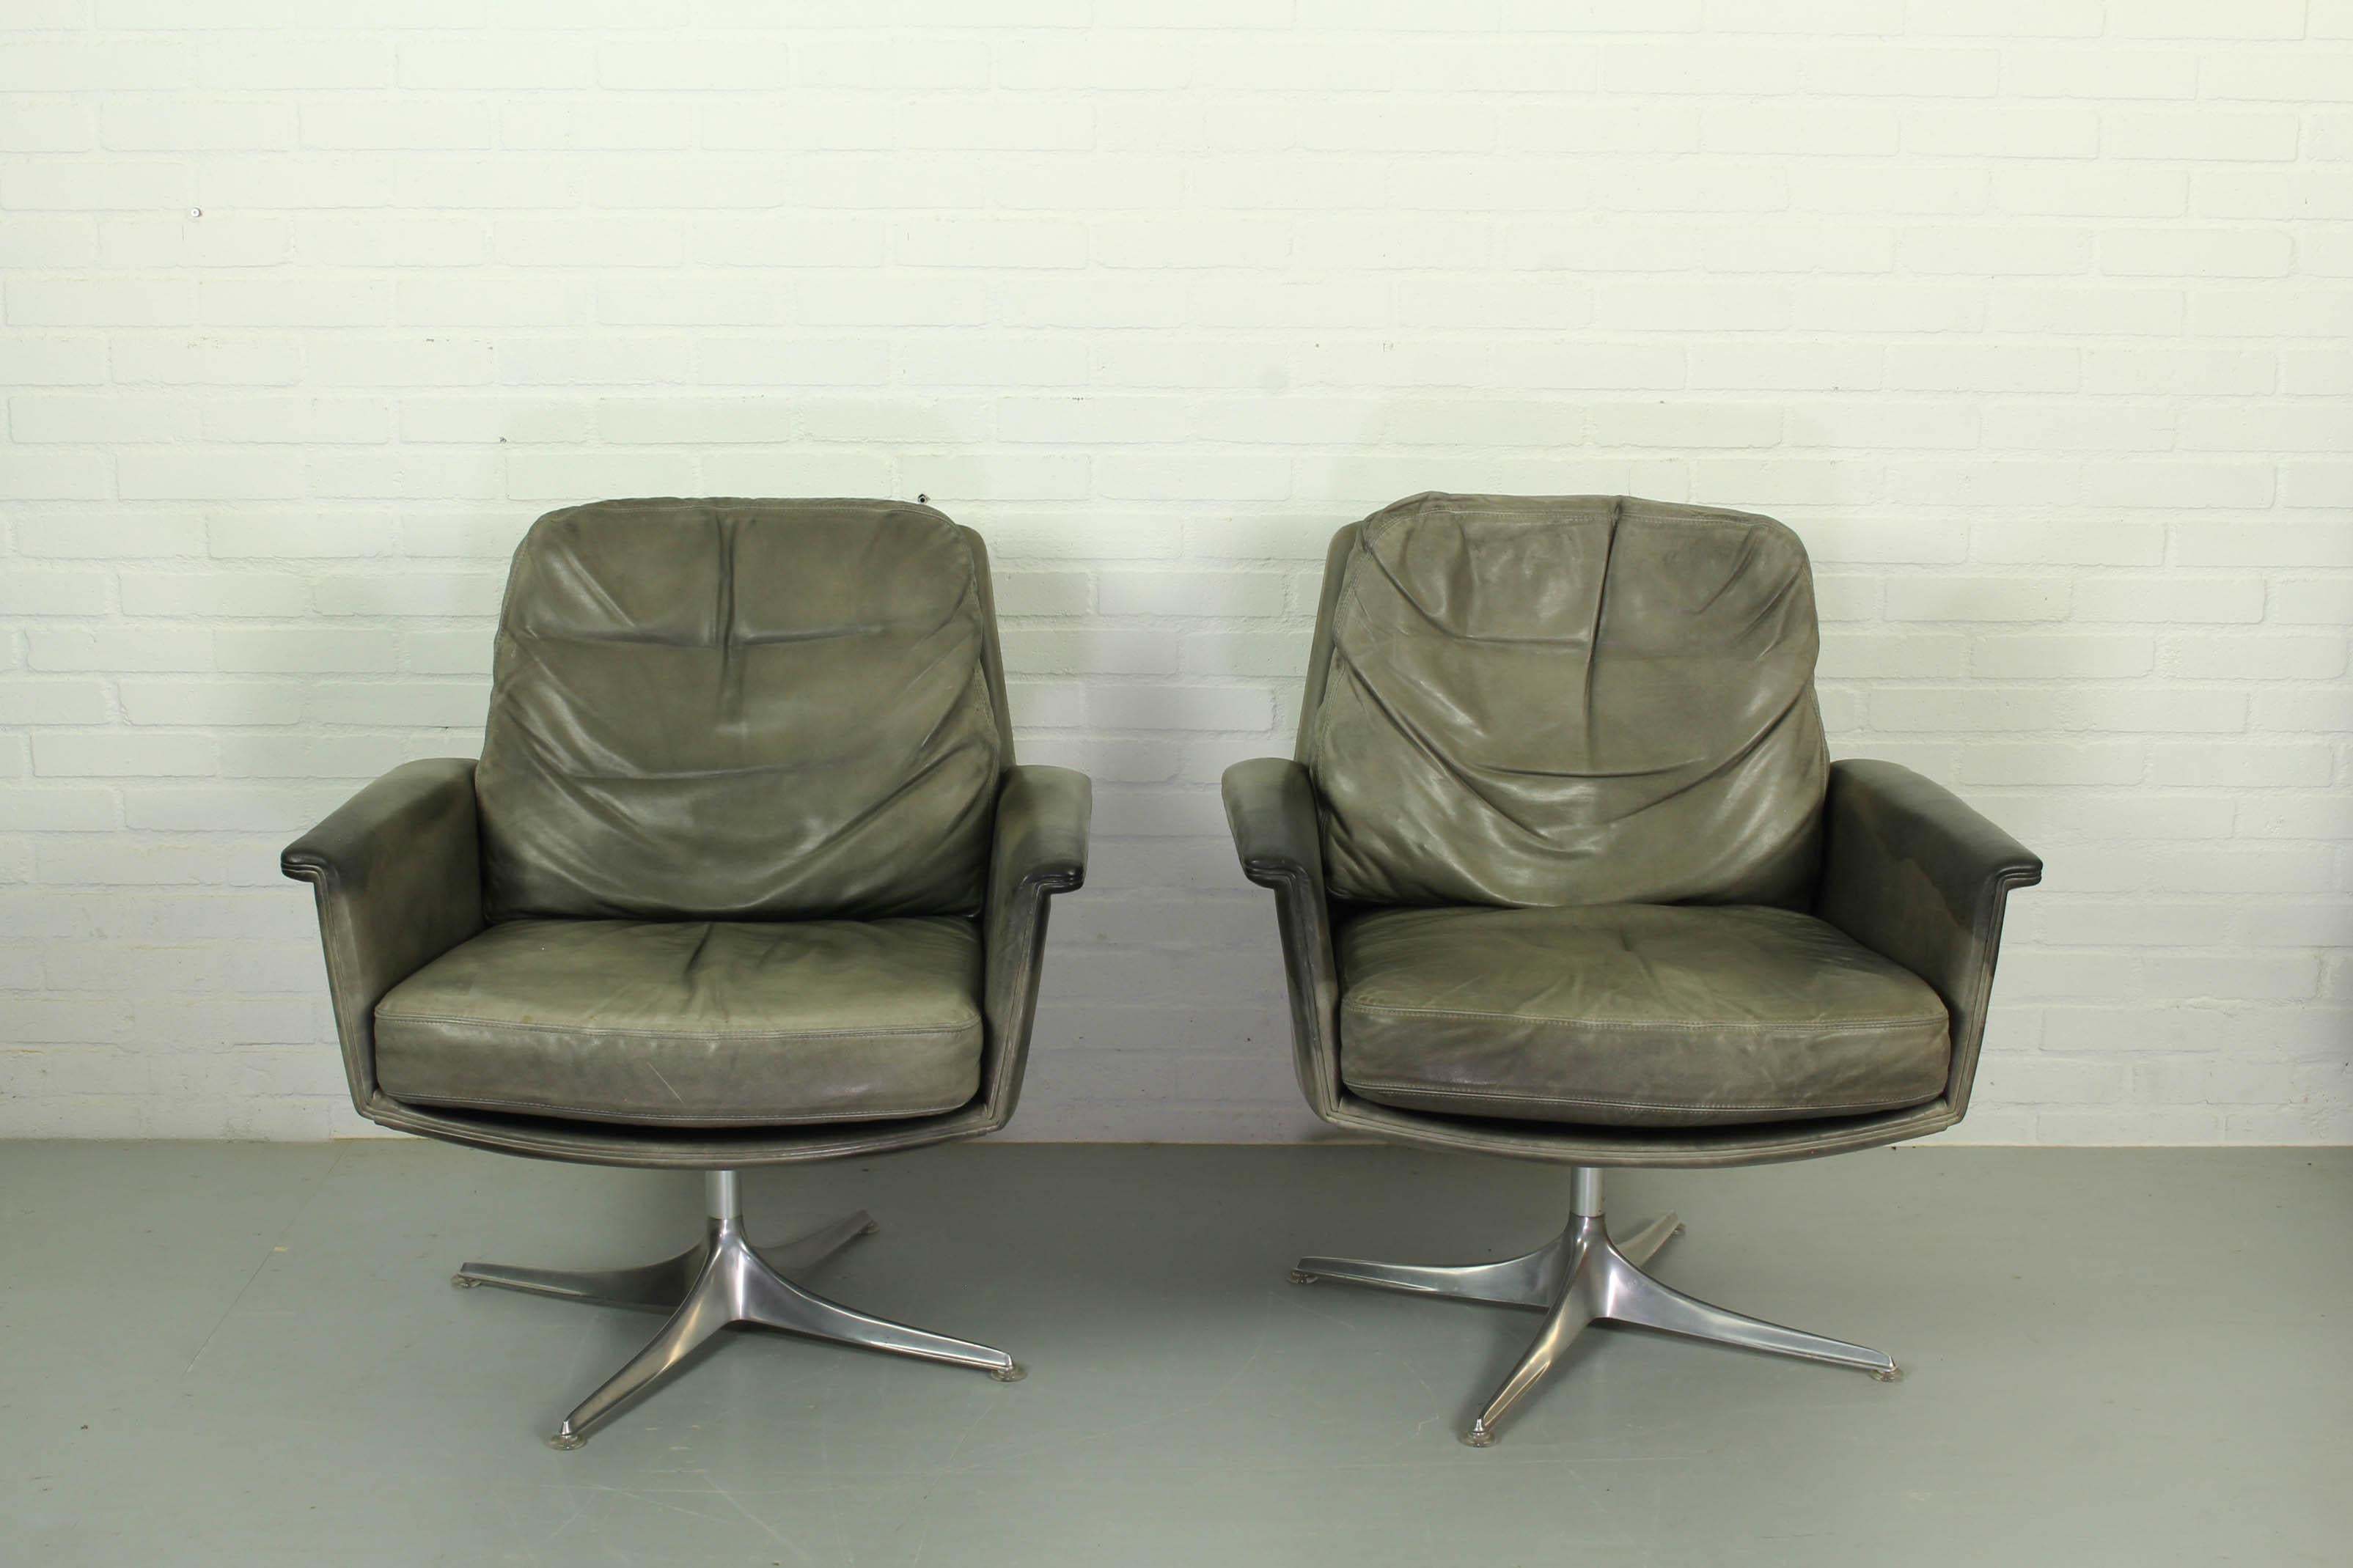 Aluminum Set of 2 Sedia Swivel Chair by Horst Brüning for Cor, 1960s, Grey Leather For Sale